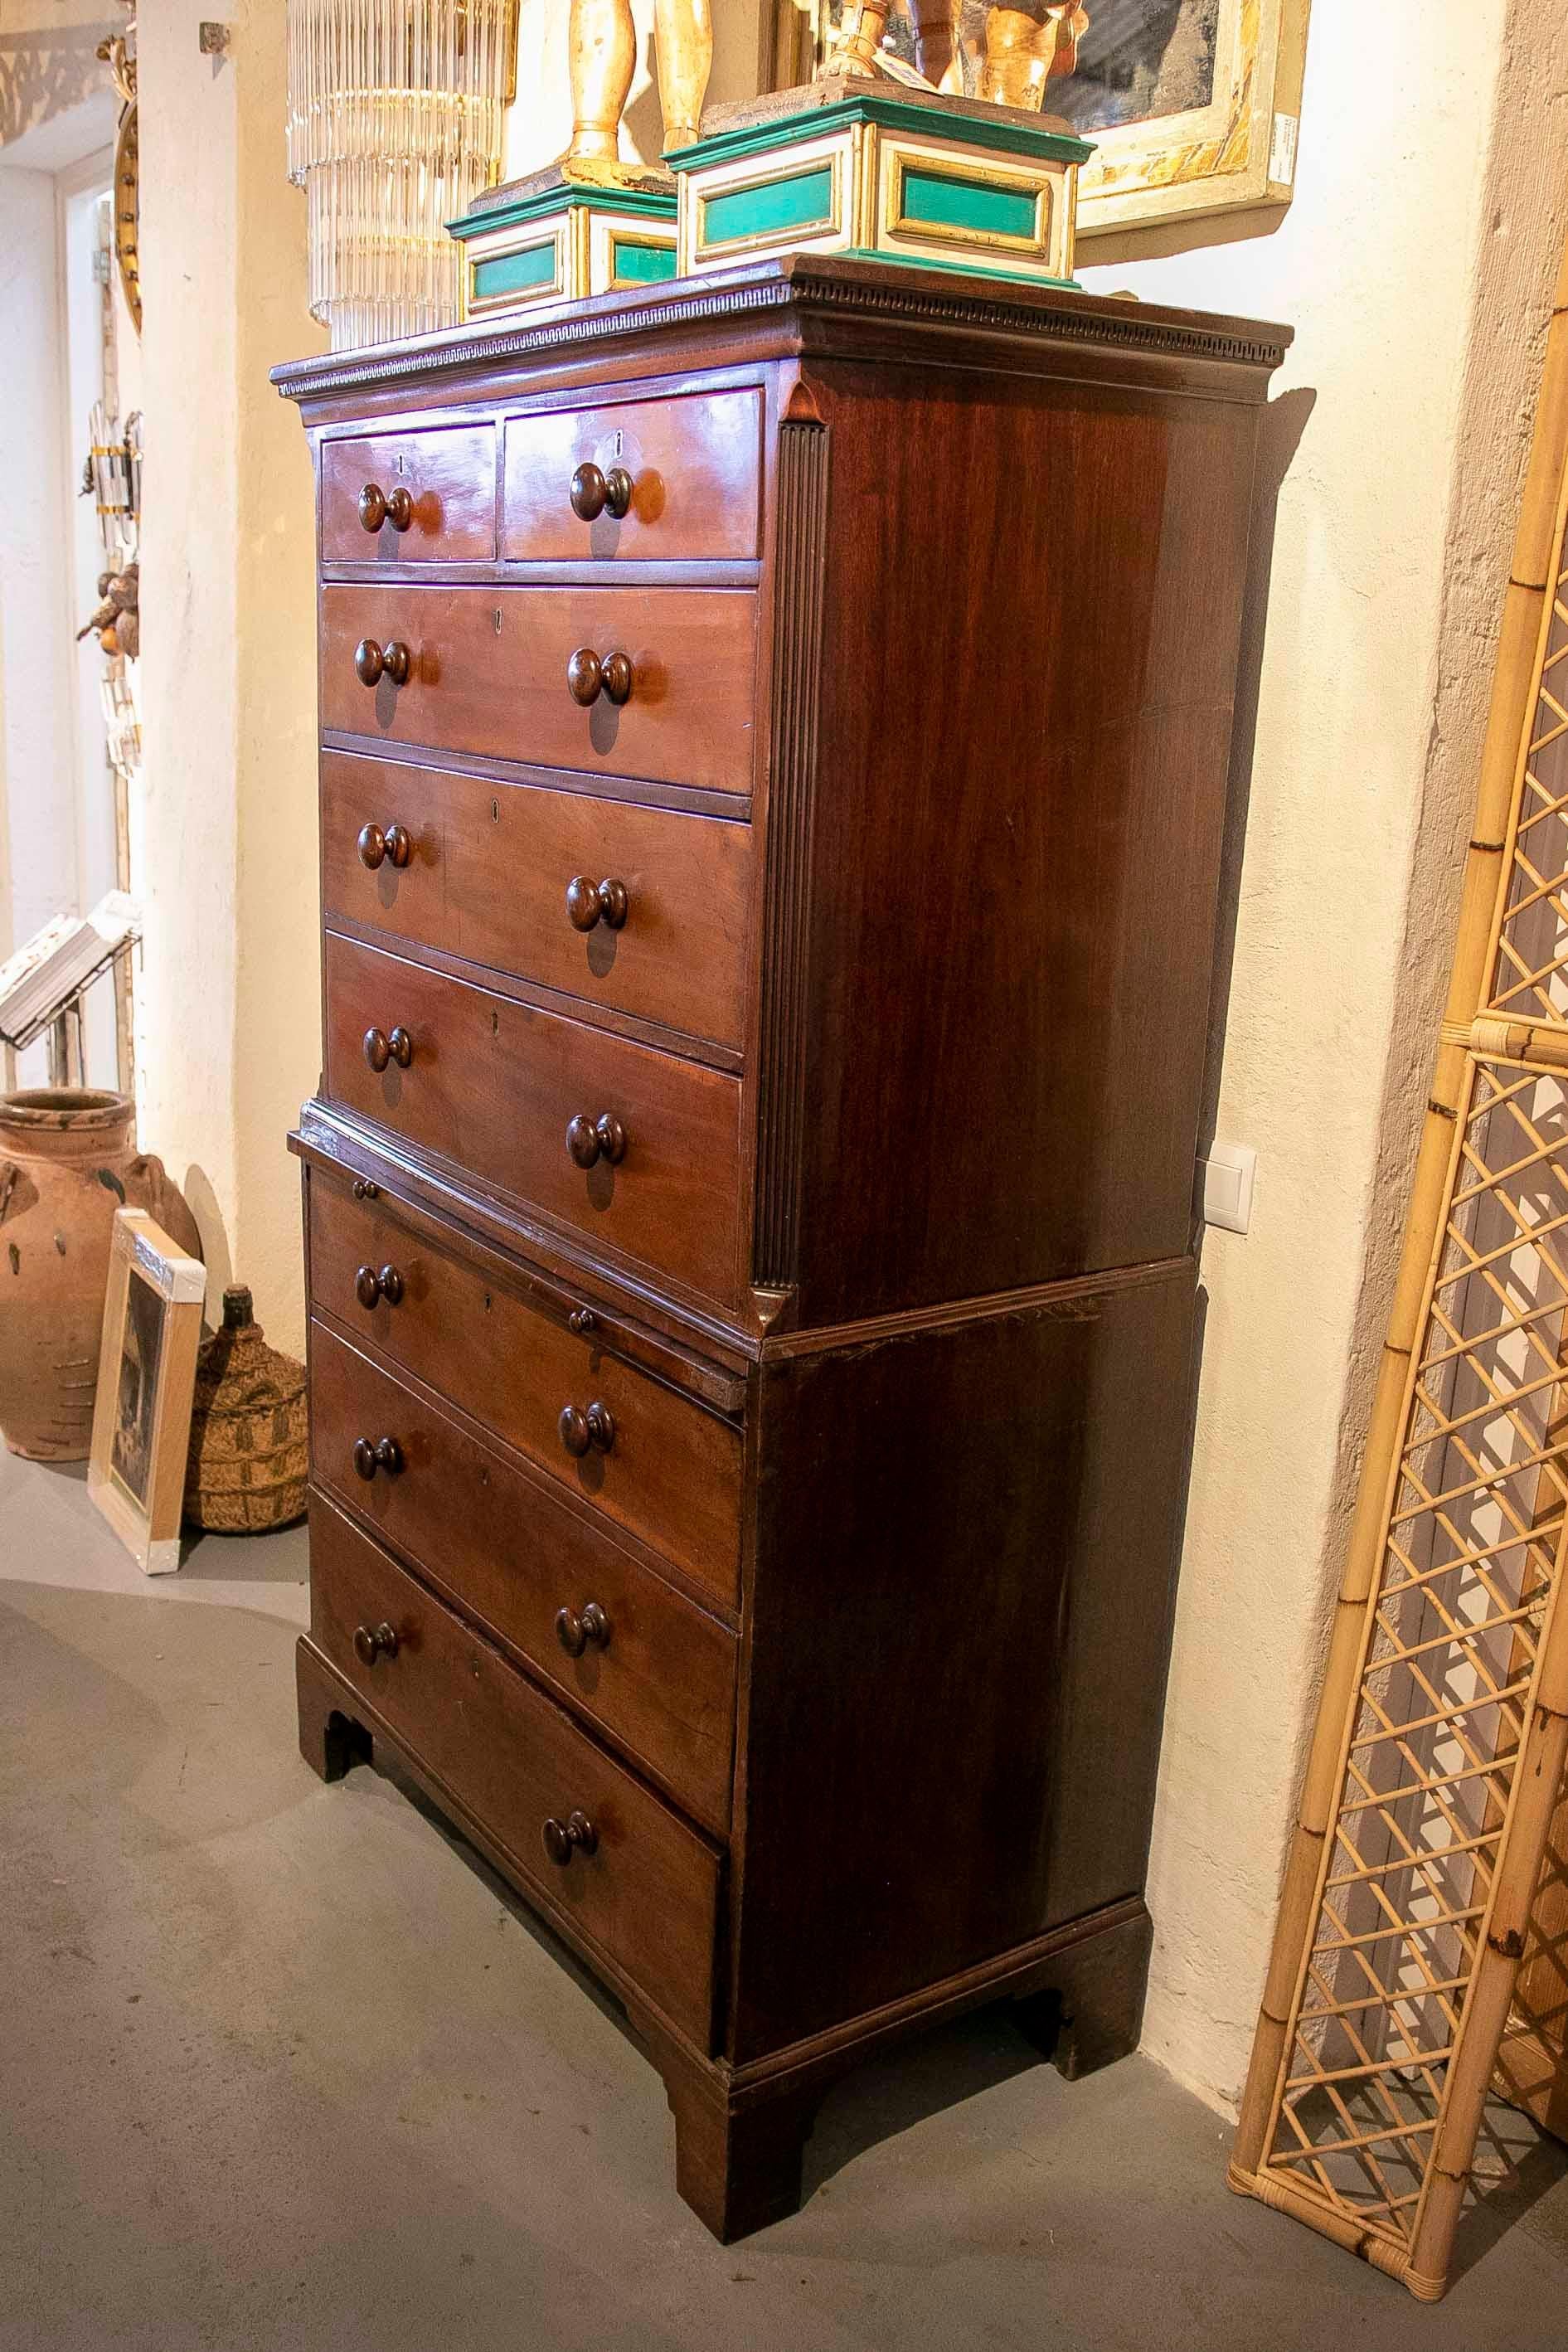 19th Century Chest of Drawers - English Mahogany Two-body Desk In Good Condition For Sale In Marbella, ES